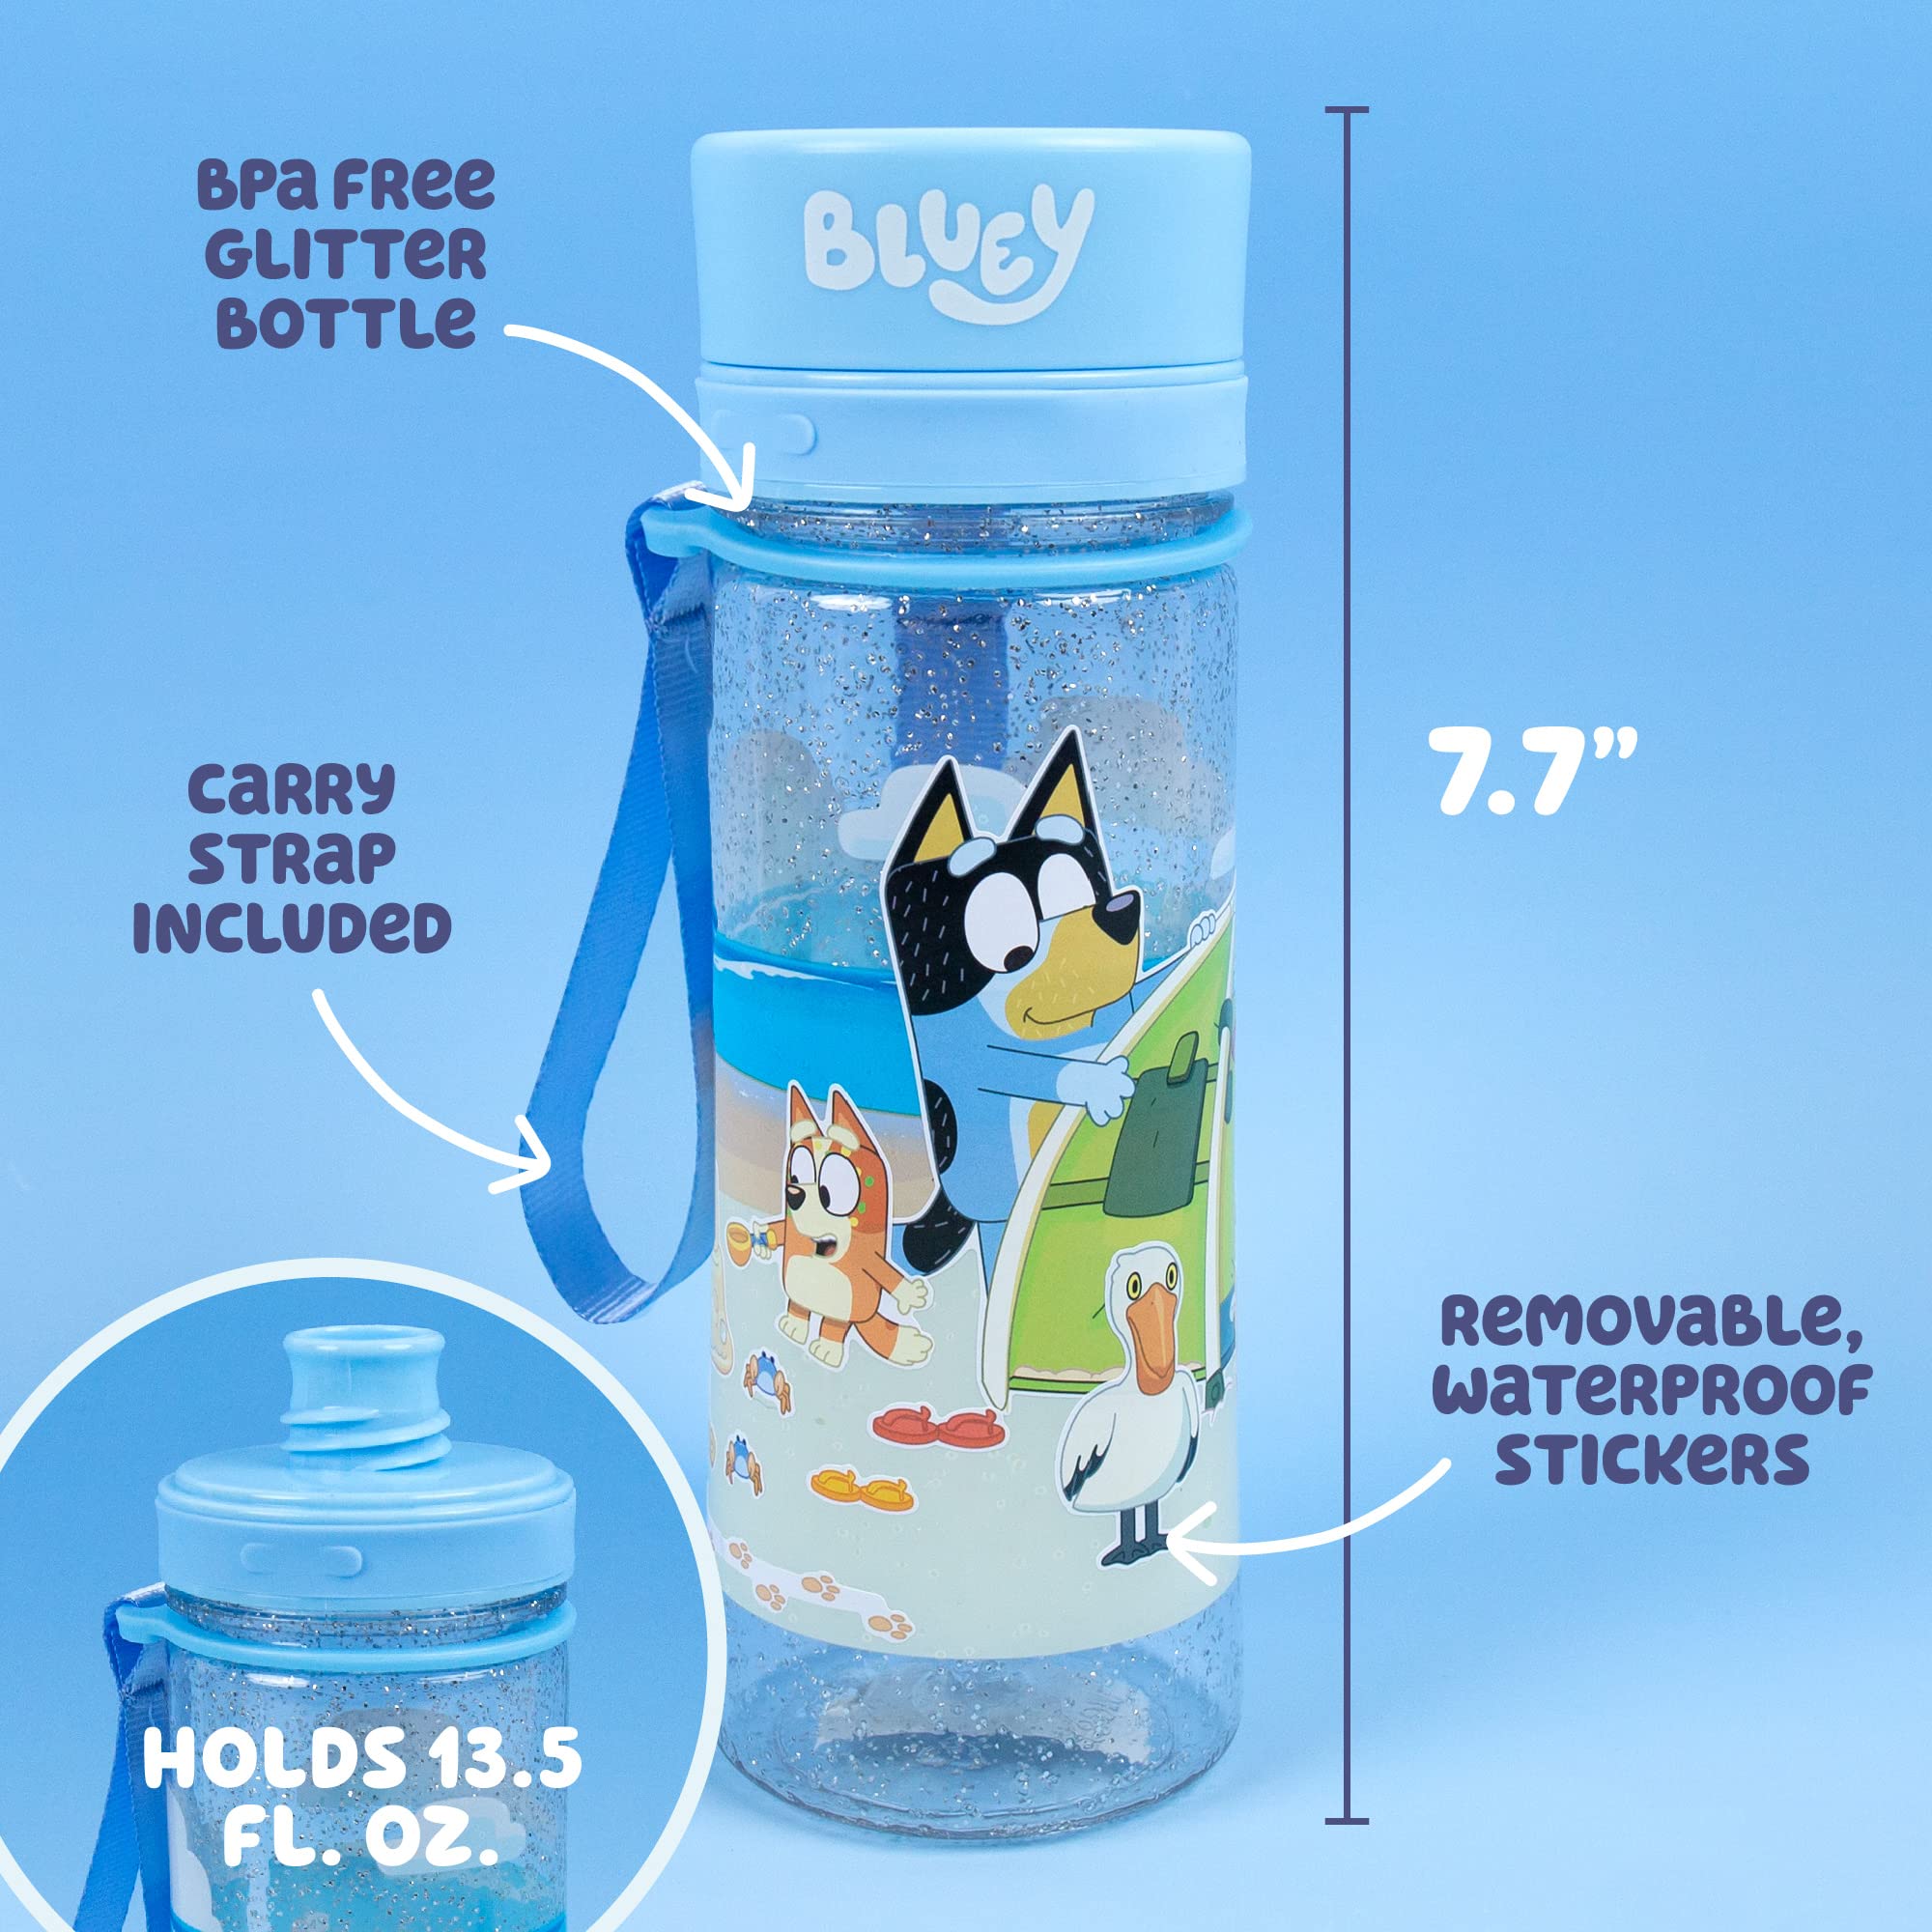 Bluey Decorate Your Own Water Bottle, Repositionable Stickers, Great For Bluey Birthday Parties, Summer Sports, and More, Reusable BPA-Free Water Bottle for Kids Ages 3, 4, 5, 6